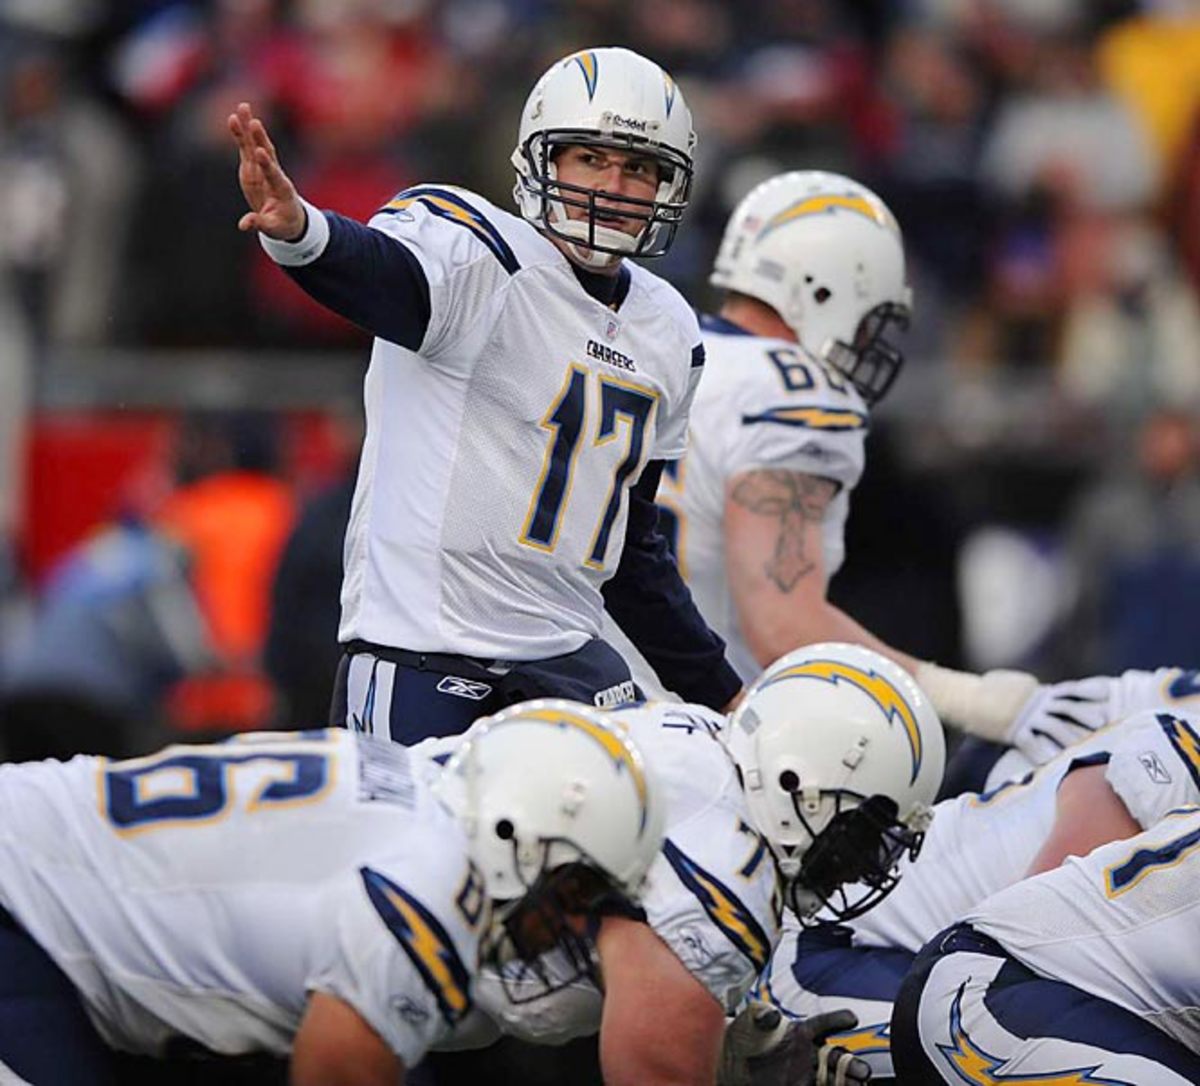 Is this the year that the Chargers get over the hump?